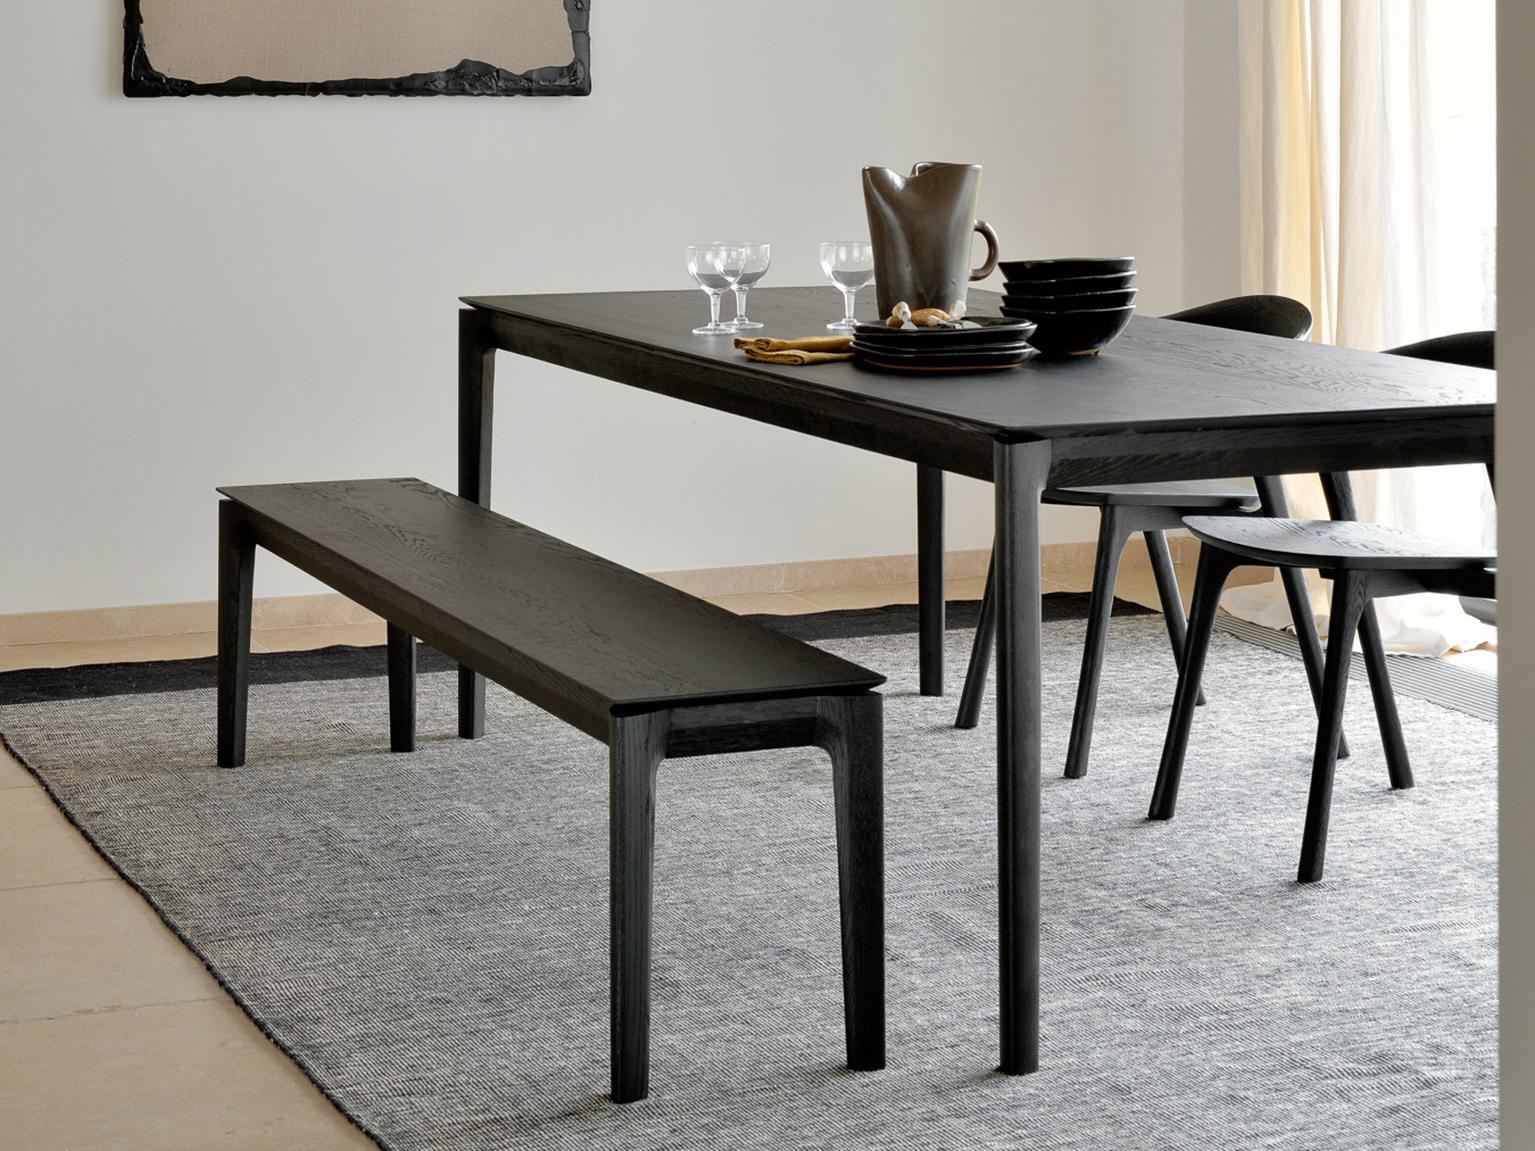 Dining Room set with Bok table and chairs in black oak | Live Light